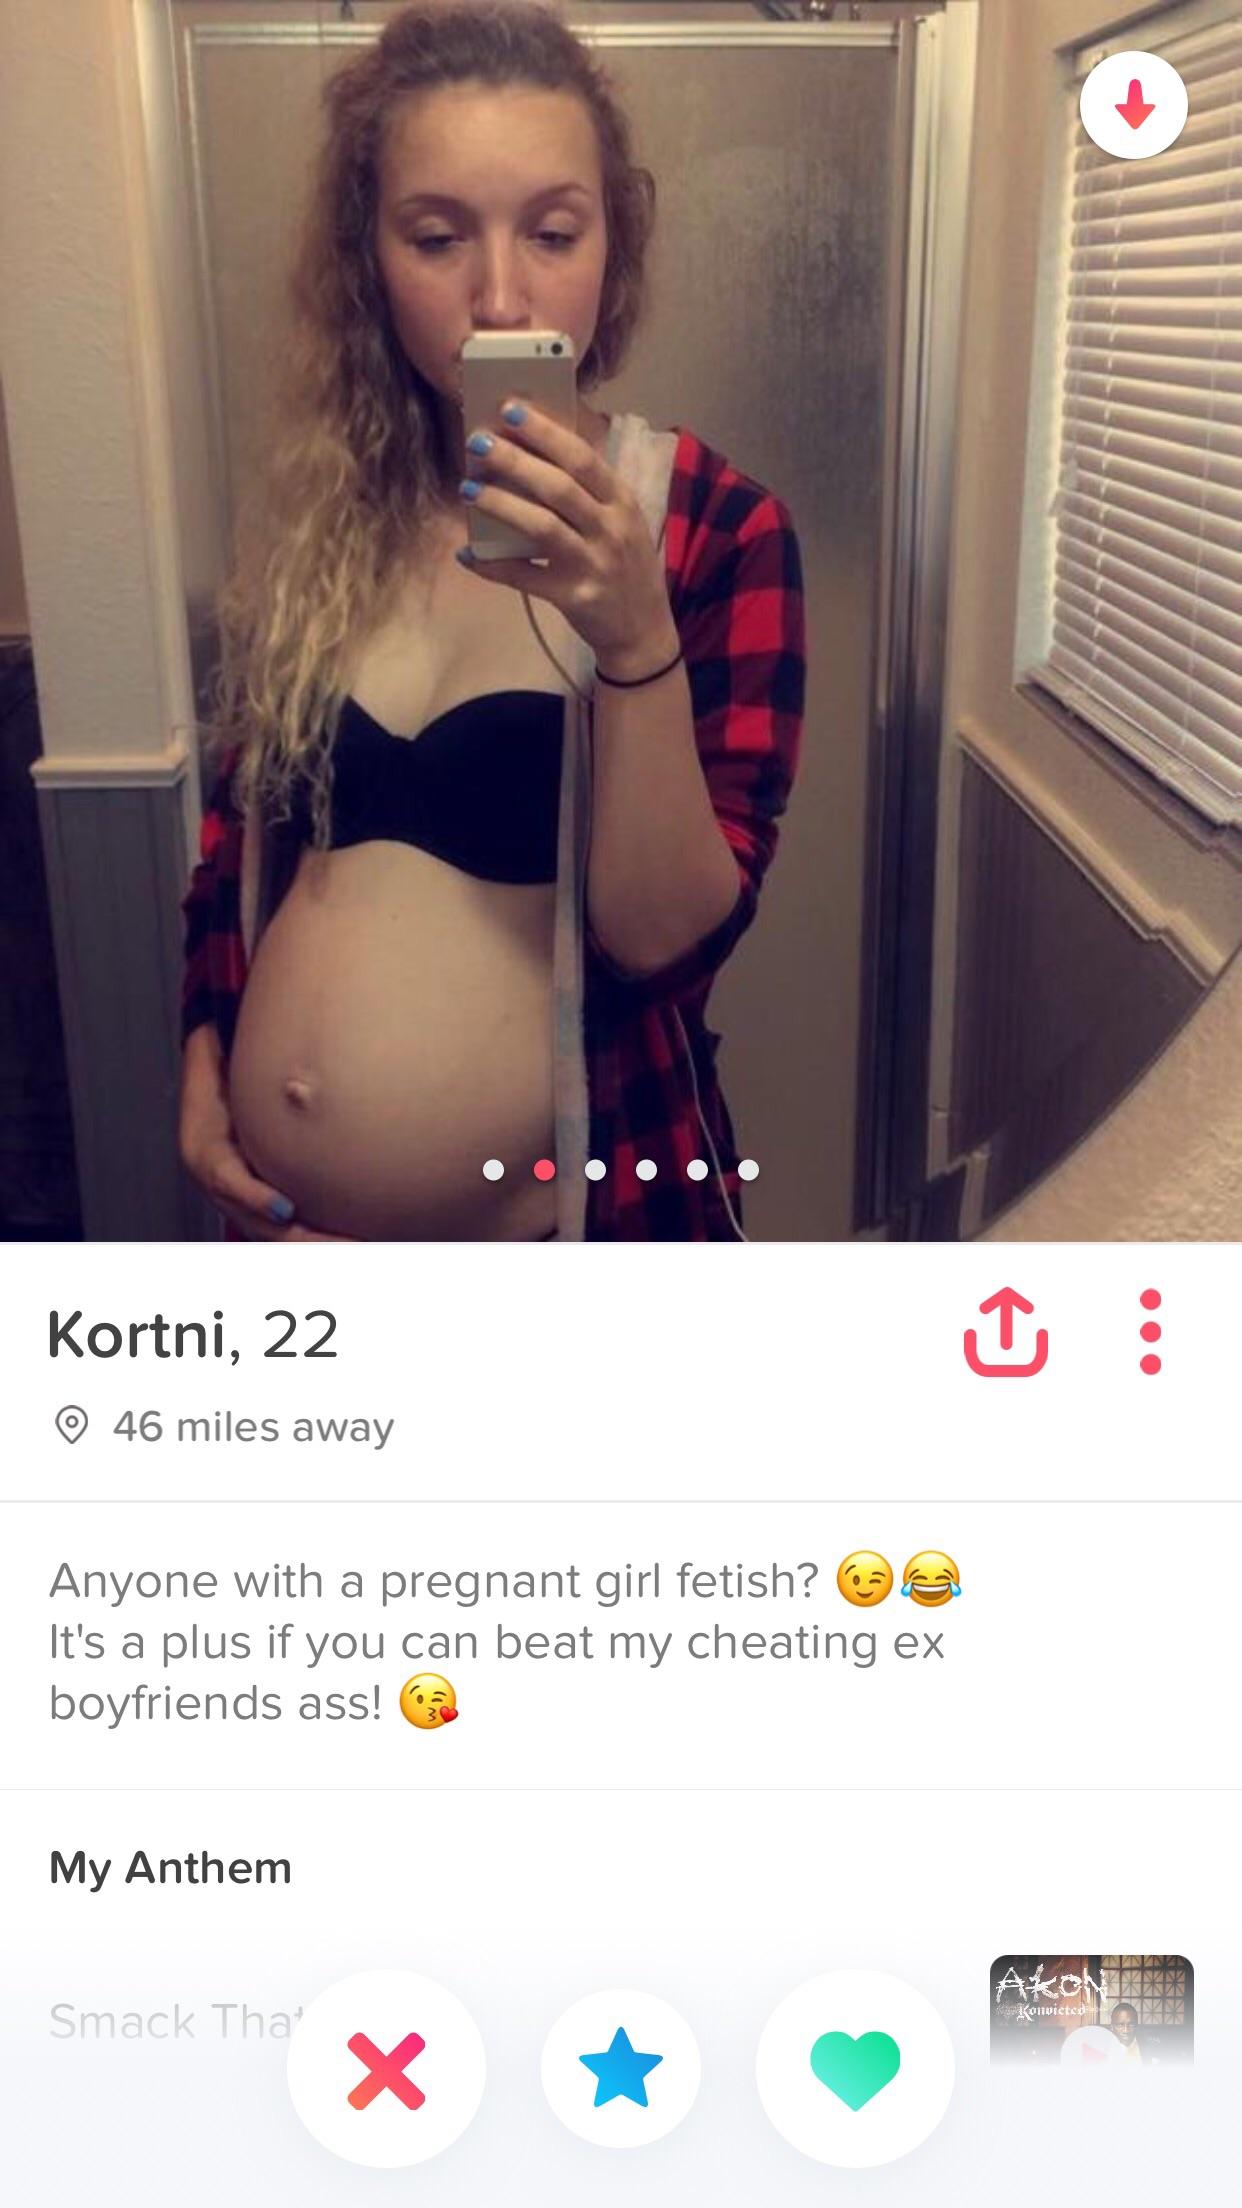 pregnant teen tinder - Kortni, 22 46 miles away Anyone with a pregnant girl fetish? It's a plus if you can beat my cheating ex boyfriends ass! My Anthem Konvicted Smack Tha'